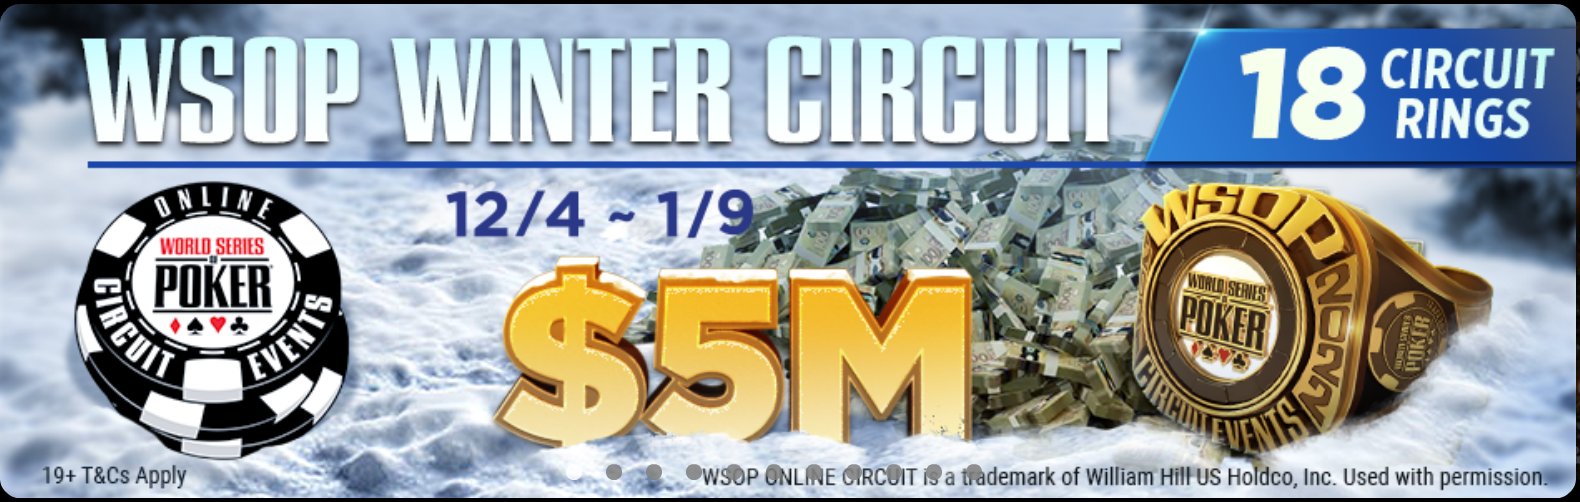 18 WSOPC Rings Up for Grabs in WSOP Ontario Winter Circuit at GGPoker.ca Pokerfuse